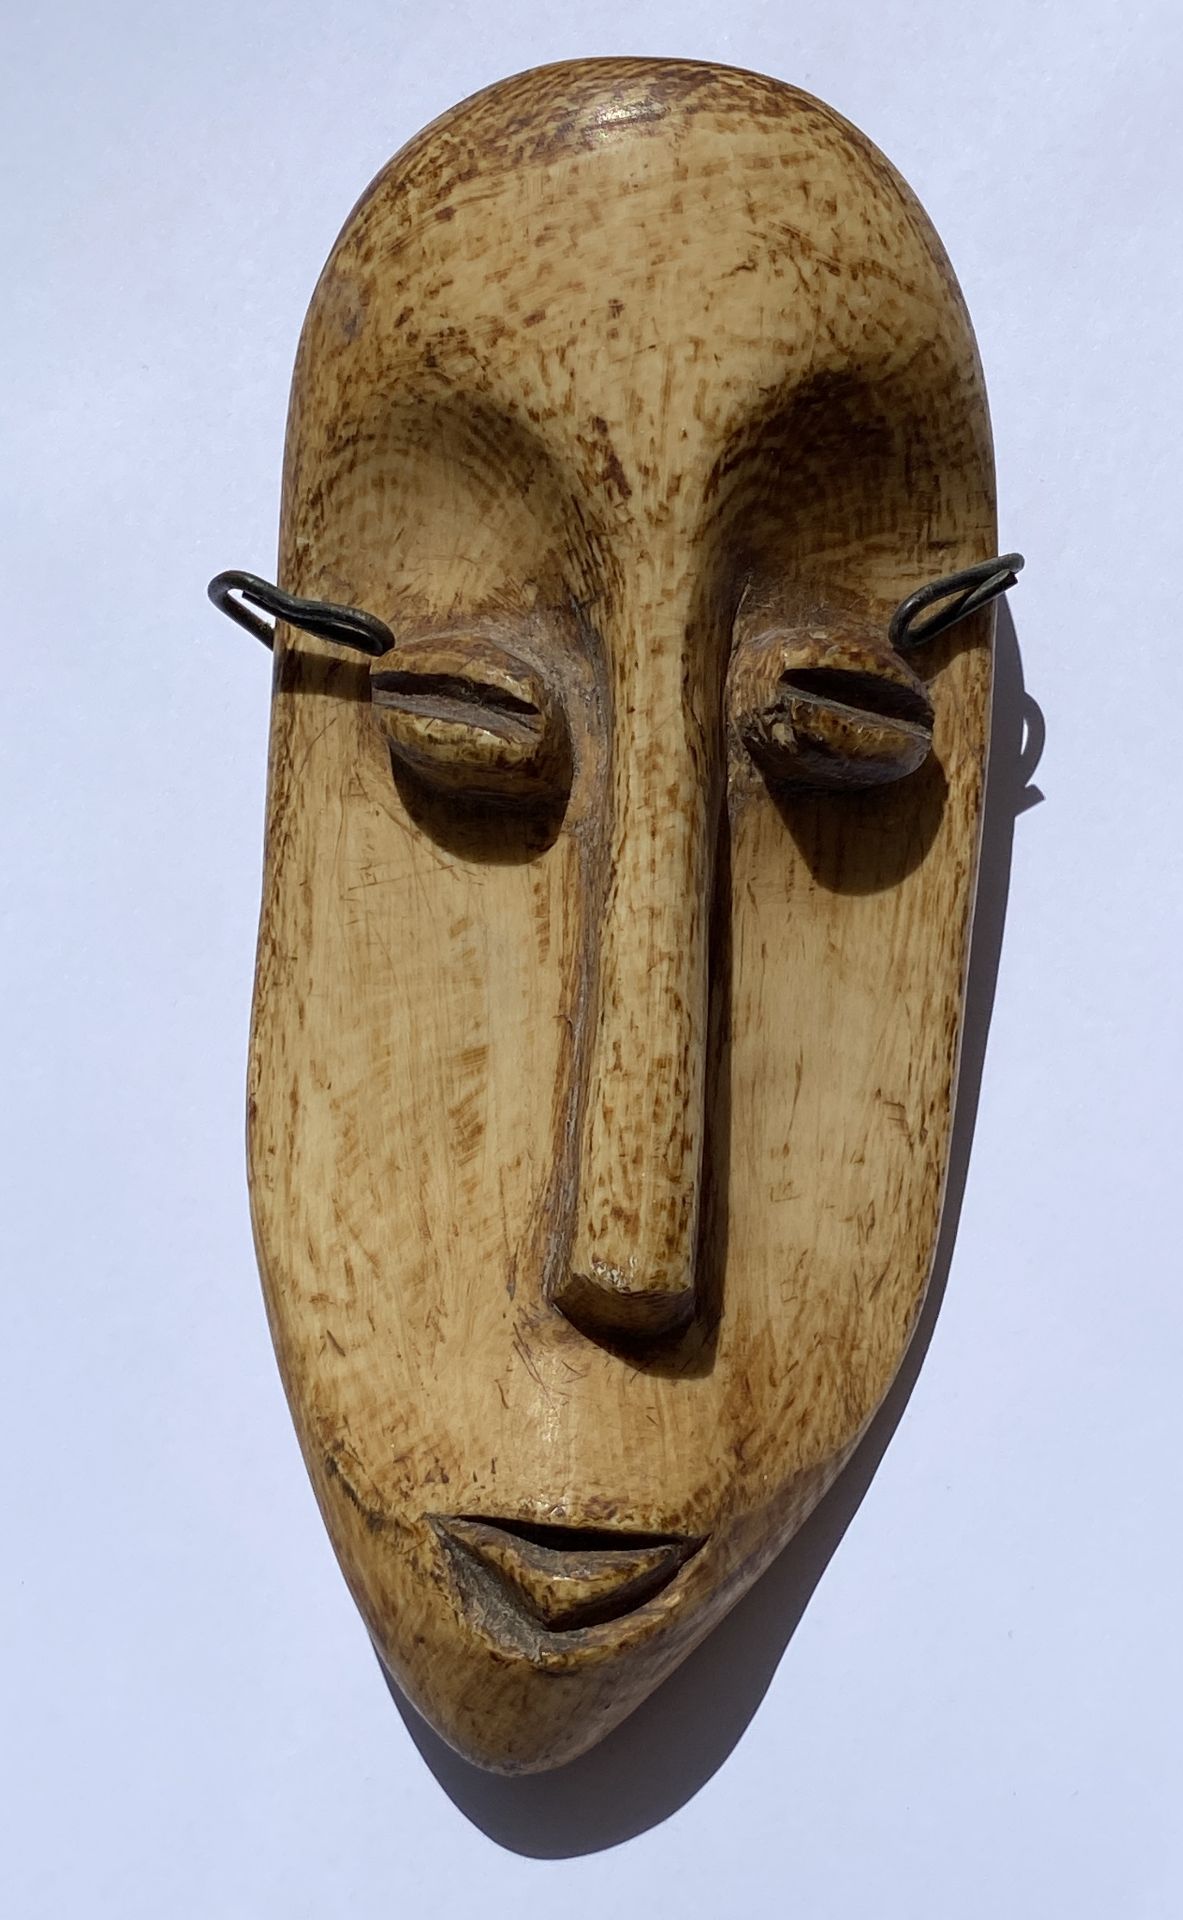 FIVE VINTAGE WOODEN AFRICAN TRIBAL MASKS TO INCLUDE TWO PAIRS OF HANGING FACE ORNAMENTS - SAO TOME - Image 2 of 5